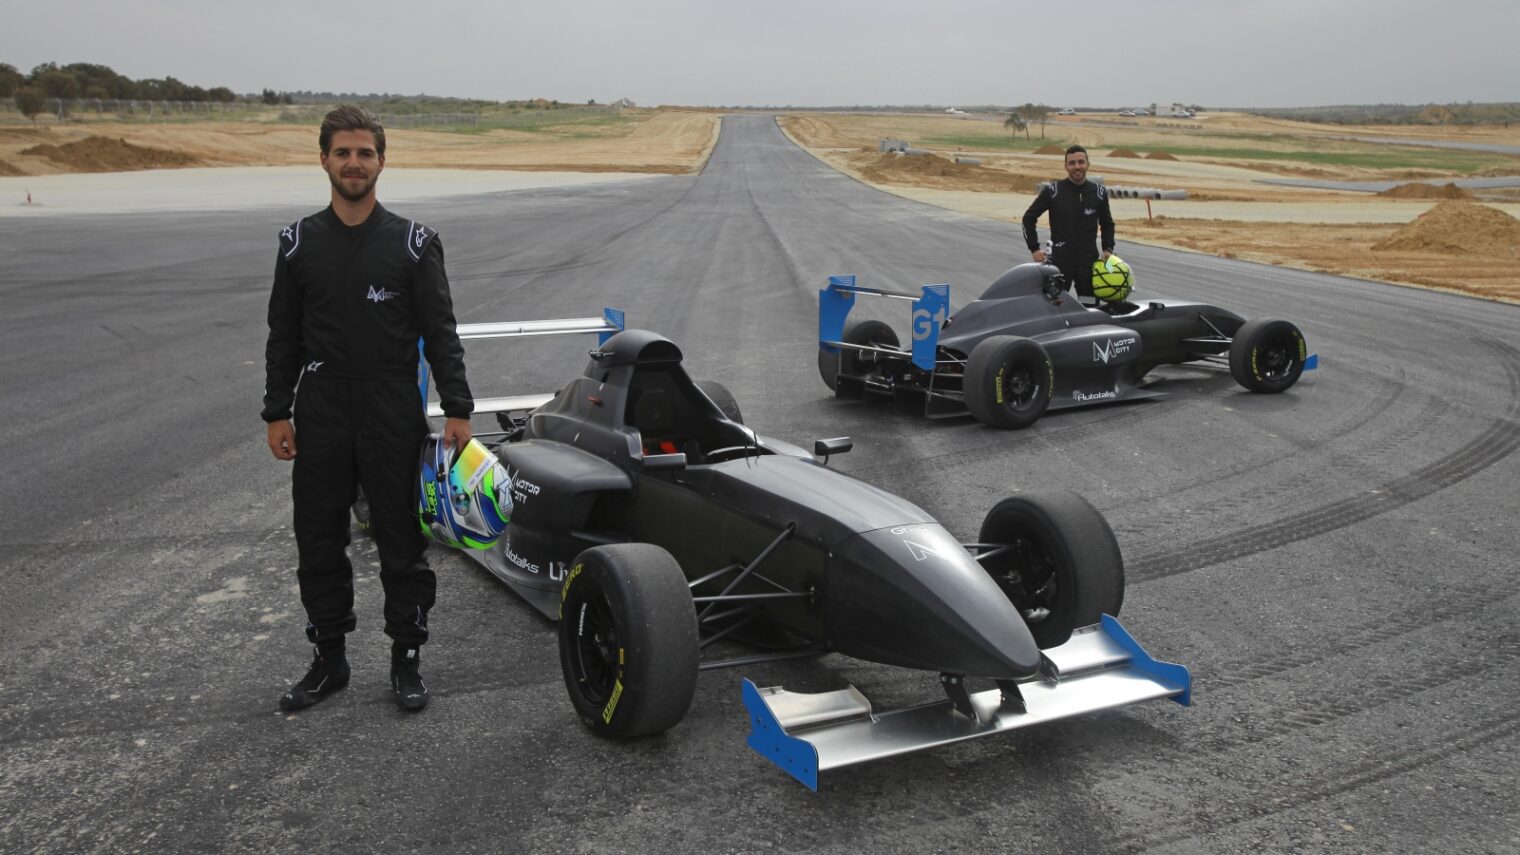 Israeli racecar drivers Yarin Stern, left, and Alon Day on the Motor City track shortly before its completion in spring 2018. Photo by Shahar Algazi